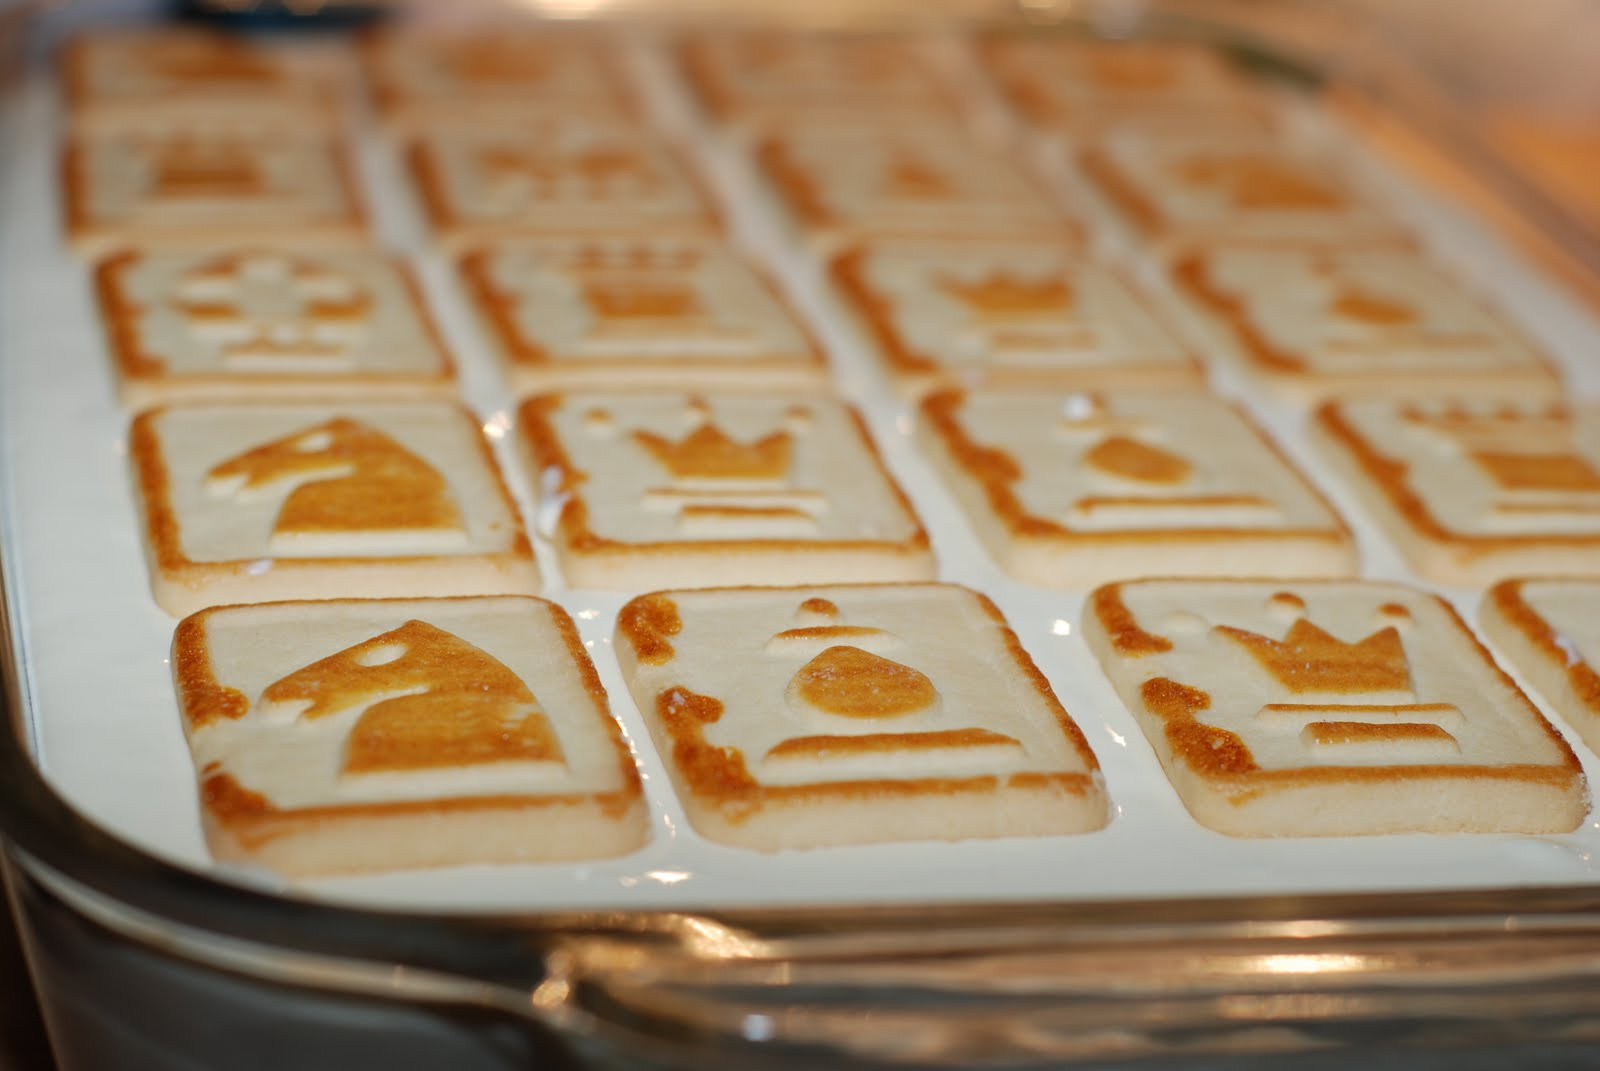 Banana Pudding With Chessmen Cookies Recipe
 Jason Cooks Chessmen Banana Pudding